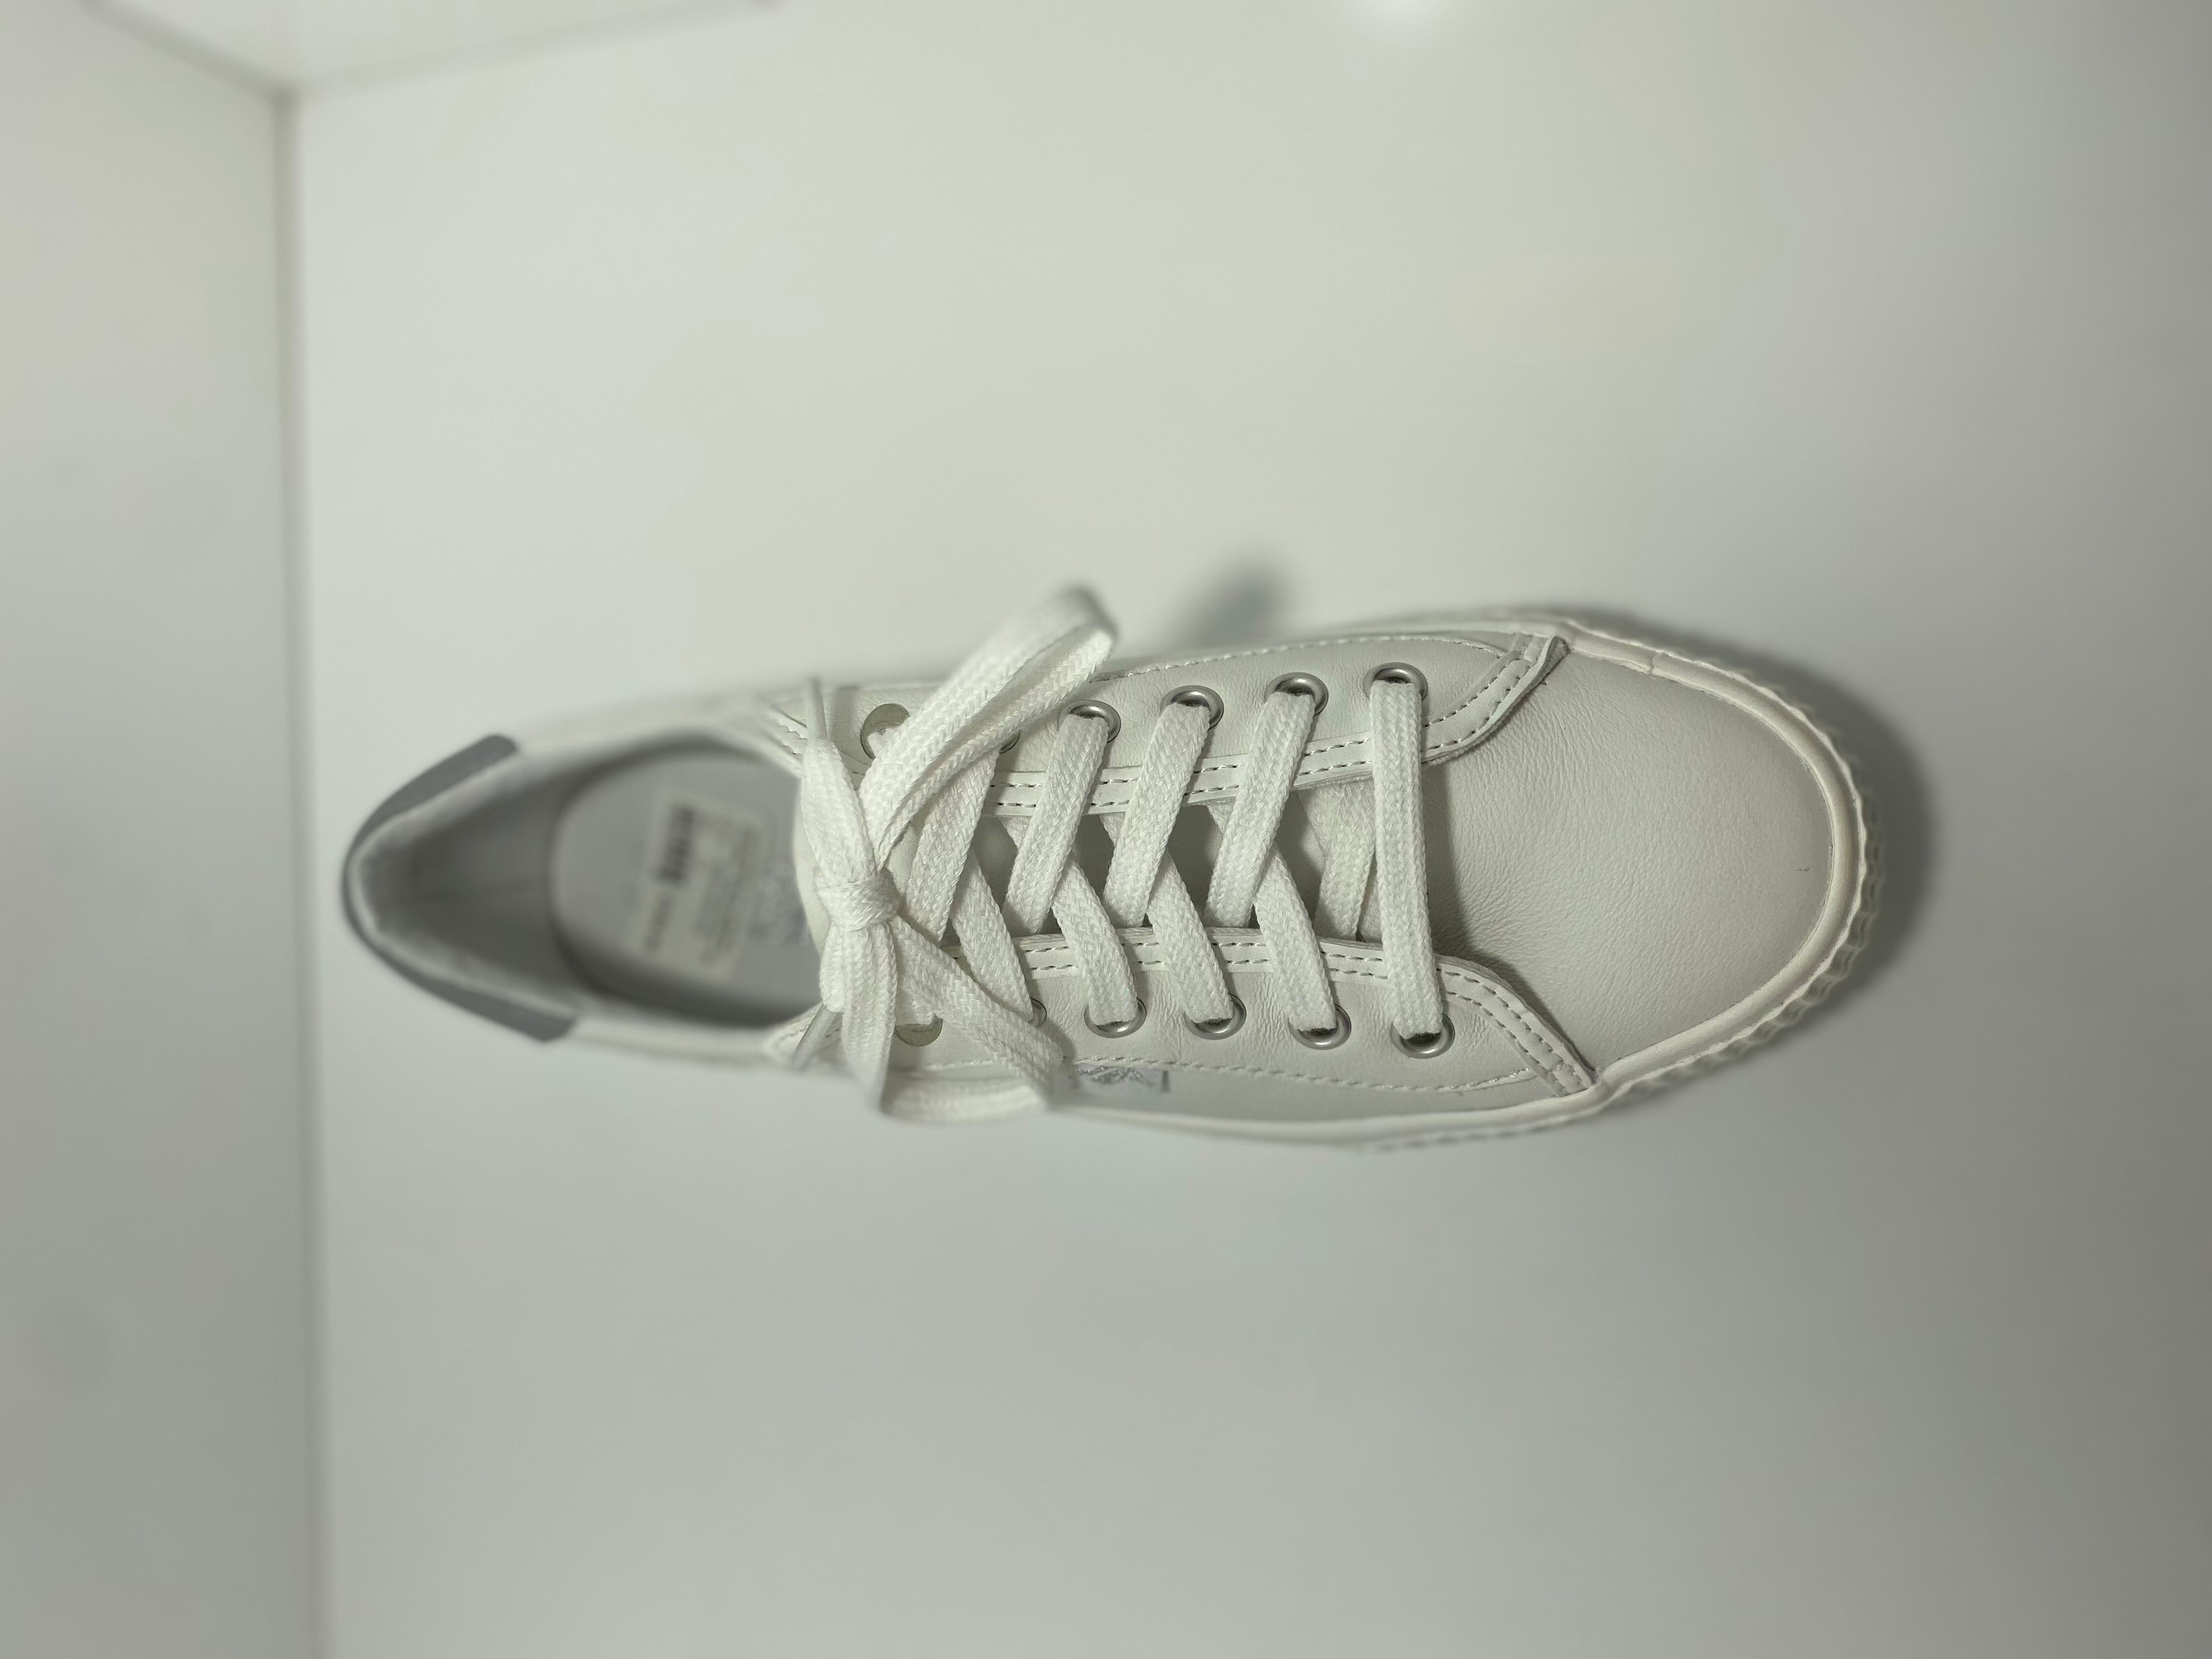 Keds Demi Trx Leather Sneaker White/Silver WH606016